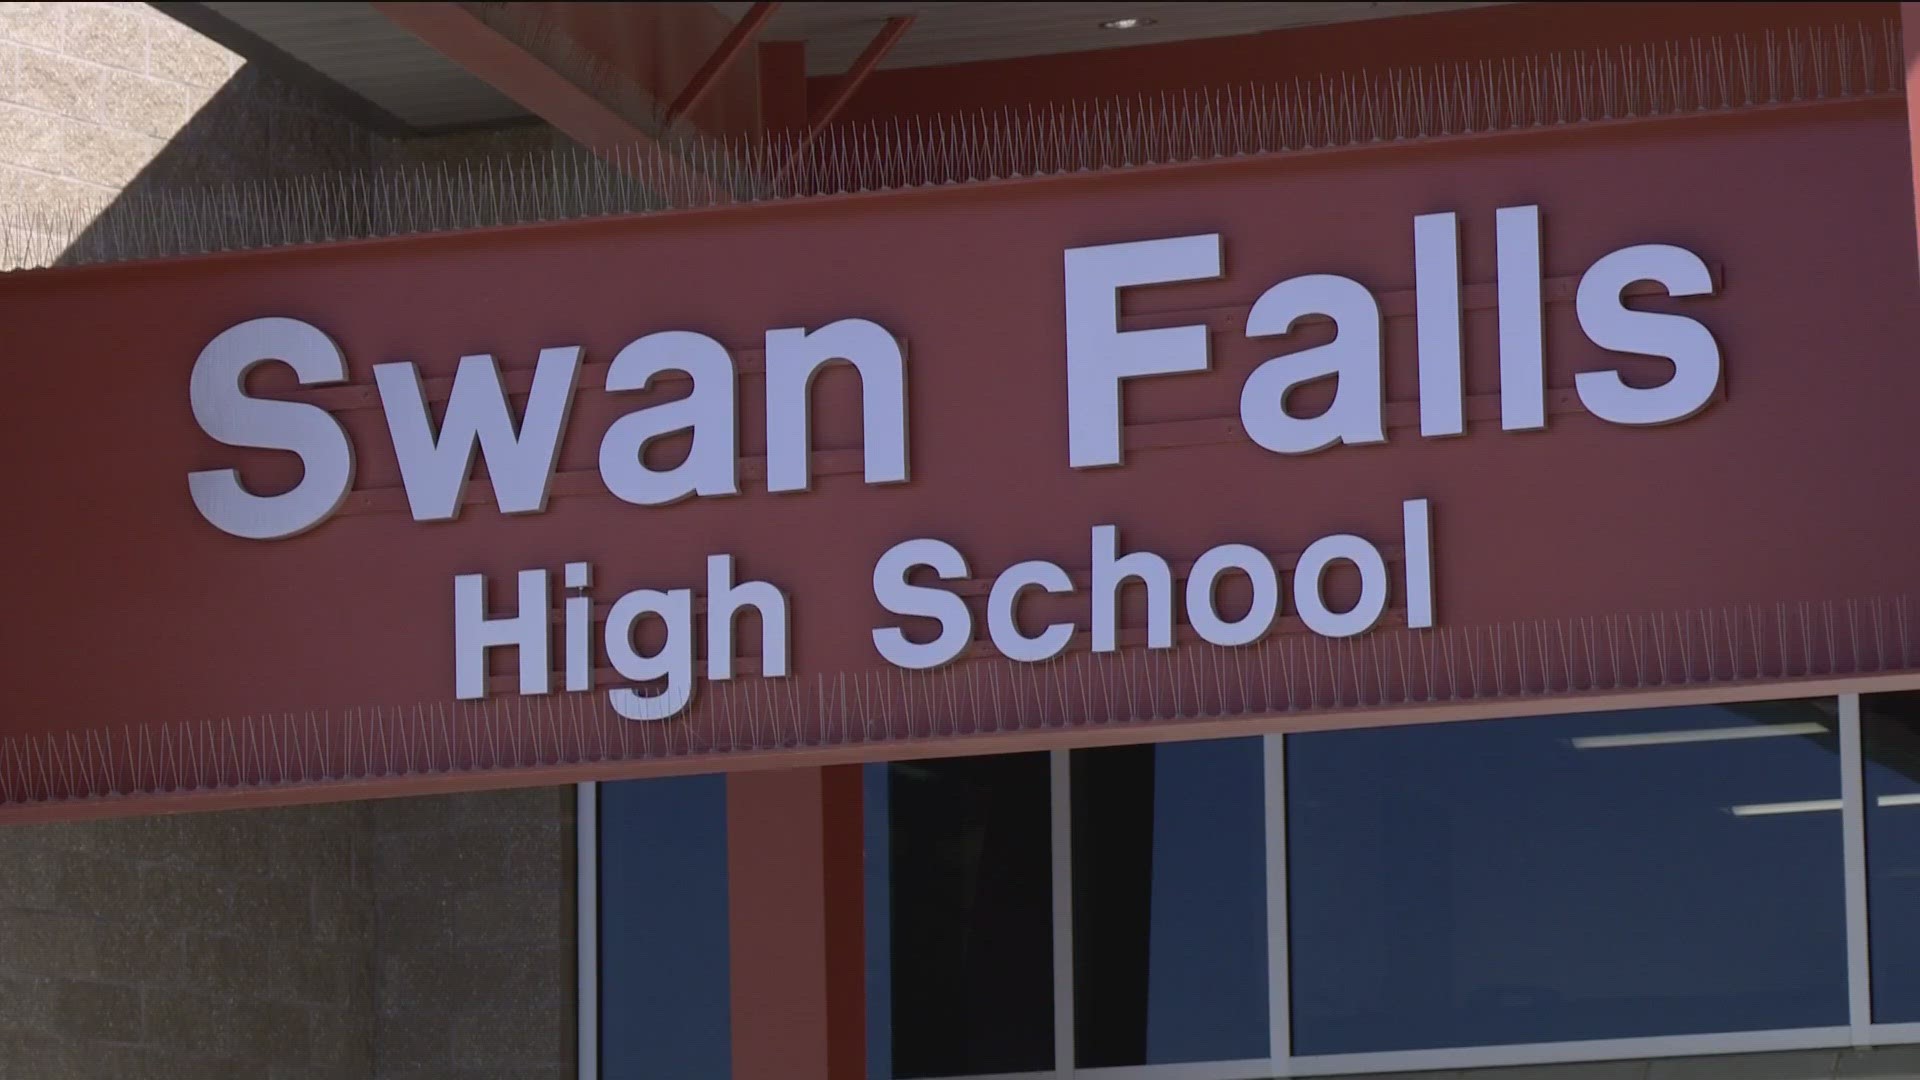 Over the next decade, the Kuna School District expects its student population to jump about 67%. Multiple schools in the district are already at or over capacity.